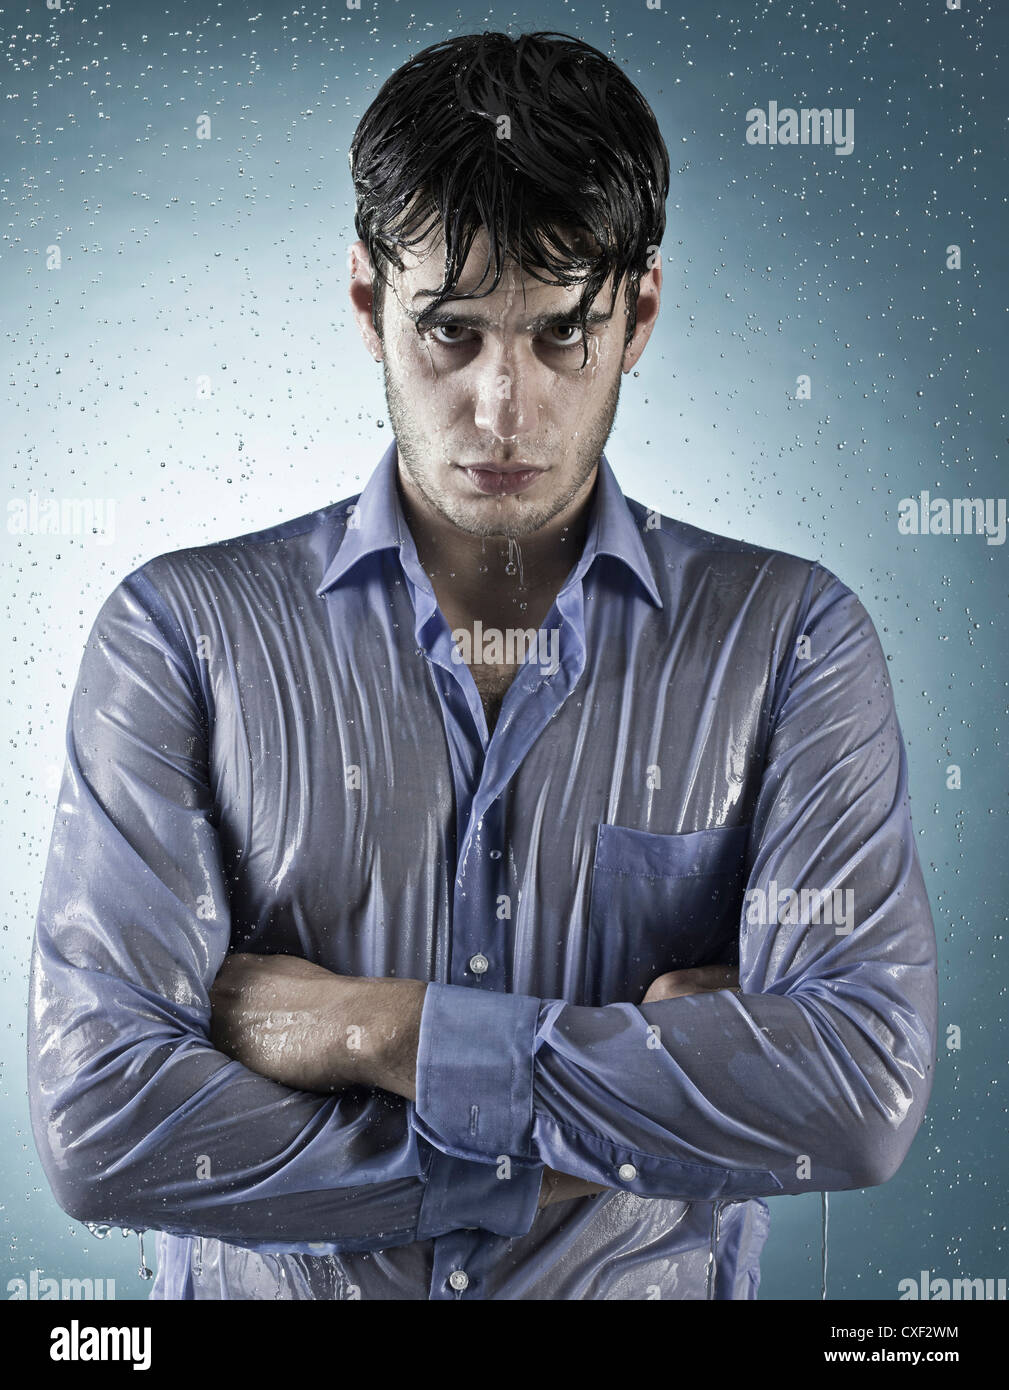 Caucasian man taking a shower in clothing Stock Photo